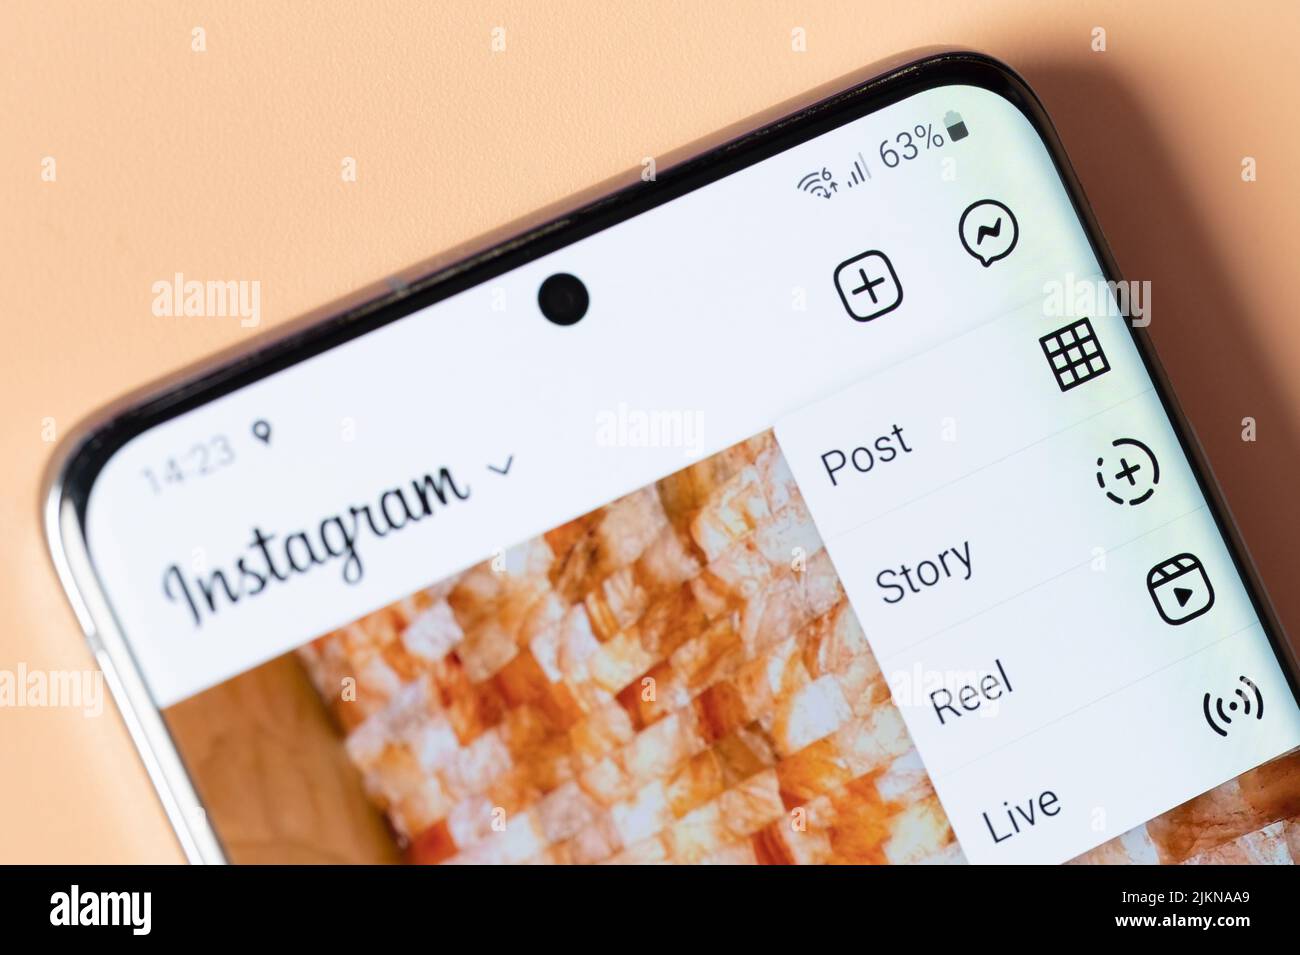 New york, USA - august 2, 2022: Creating content on instagram app on smartphone screen close up view Stock Photo